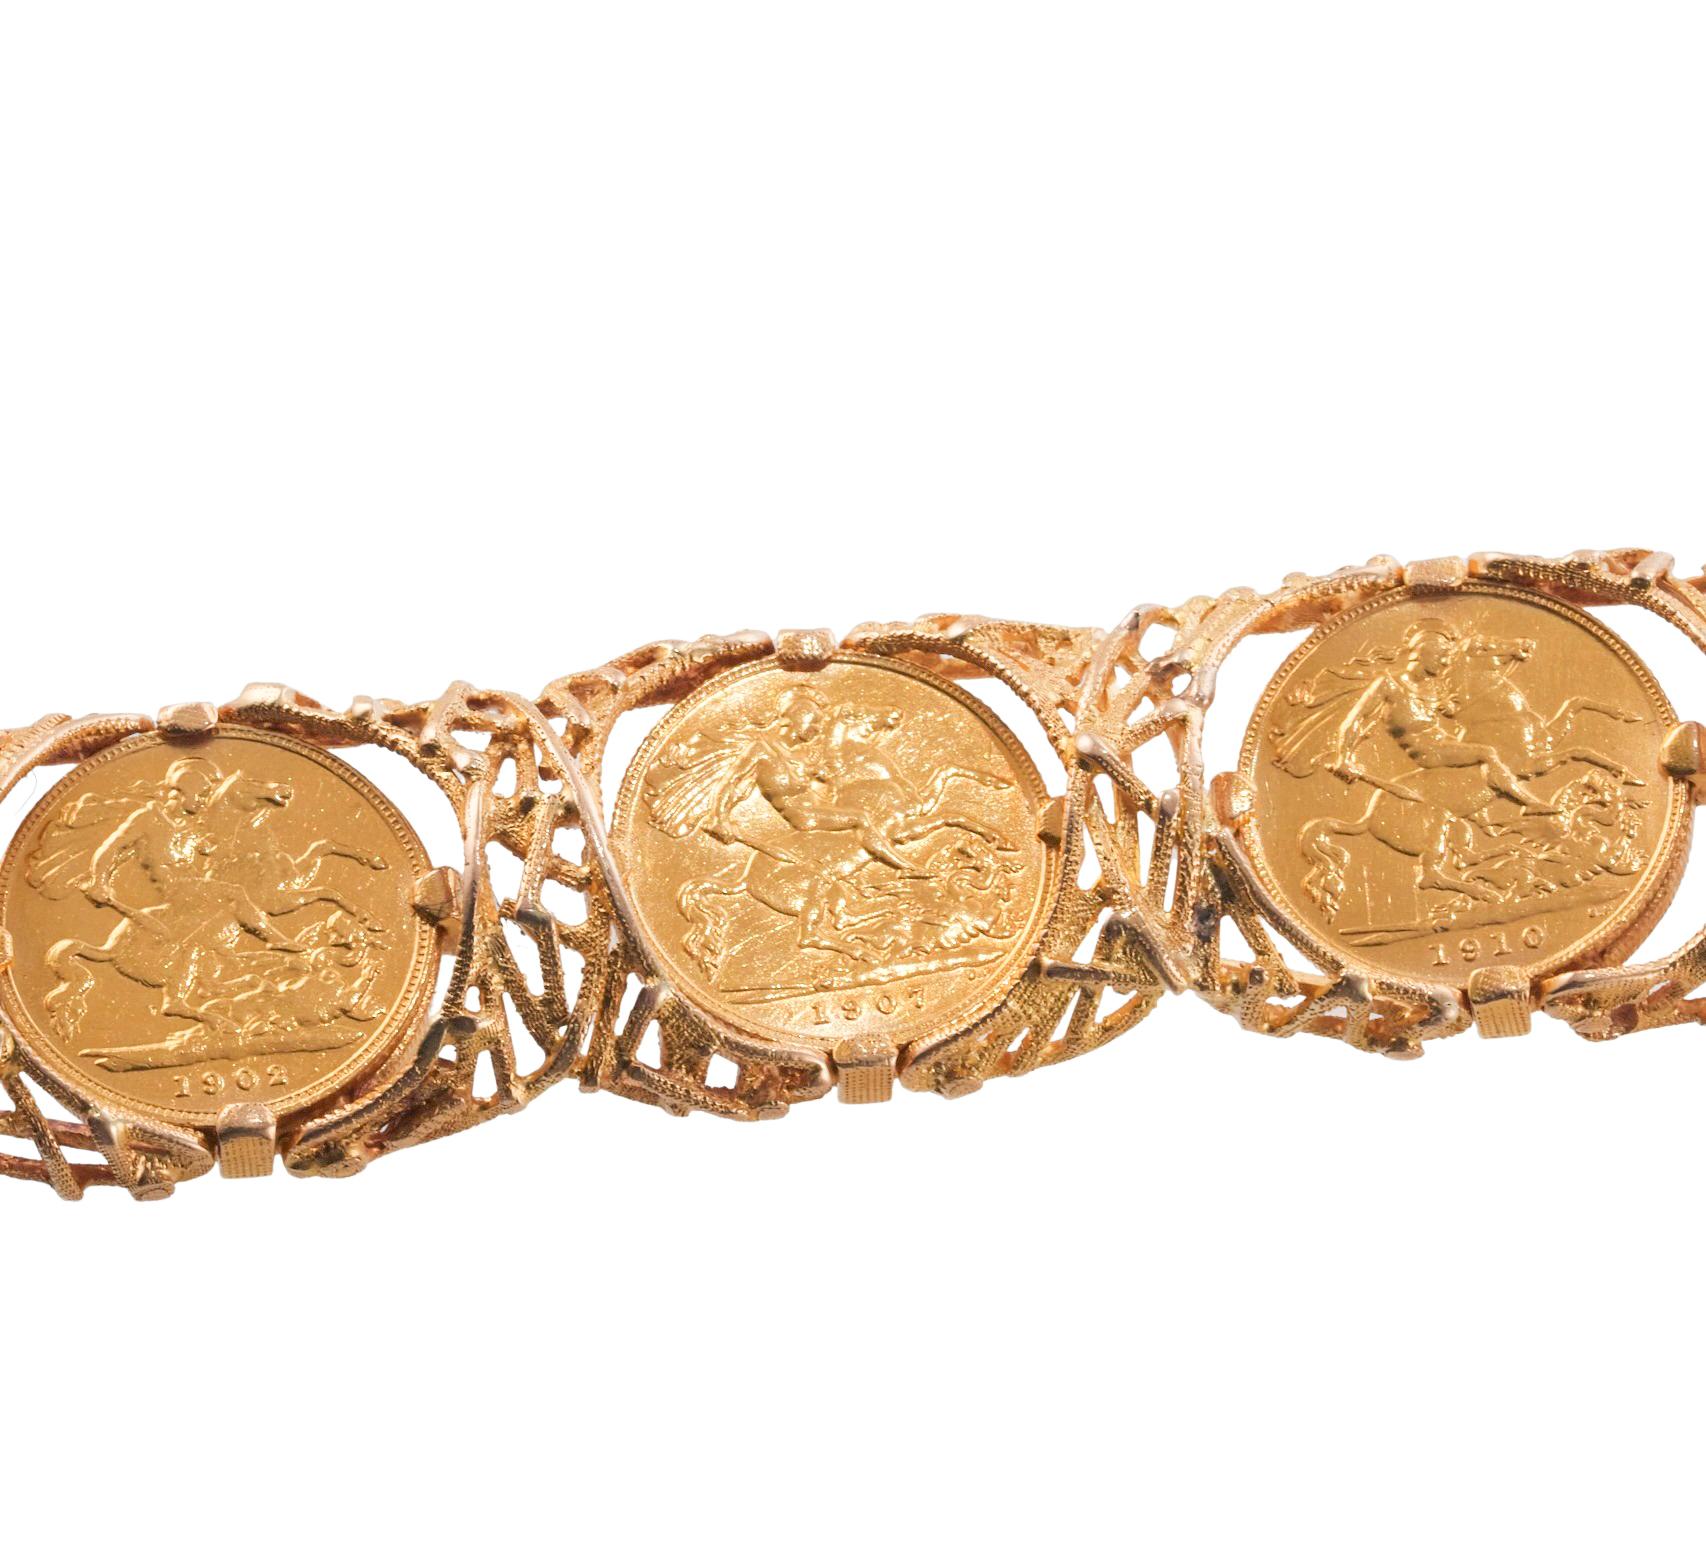 1970s Gold Coin Bracelet In Excellent Condition For Sale In New York, NY